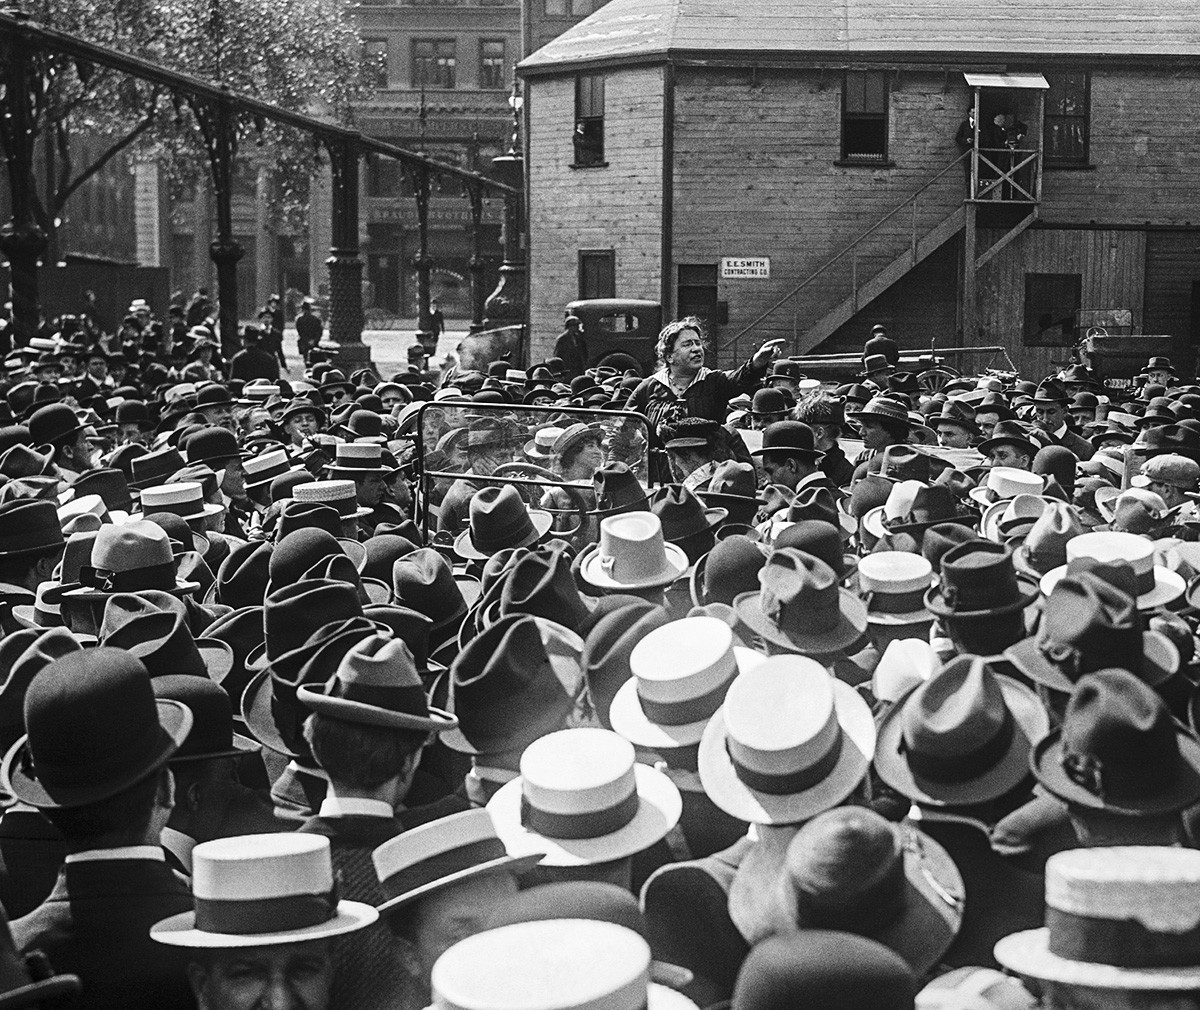 Emma Goldman standing in car speaks about birth control at Union Square Park in 1916.